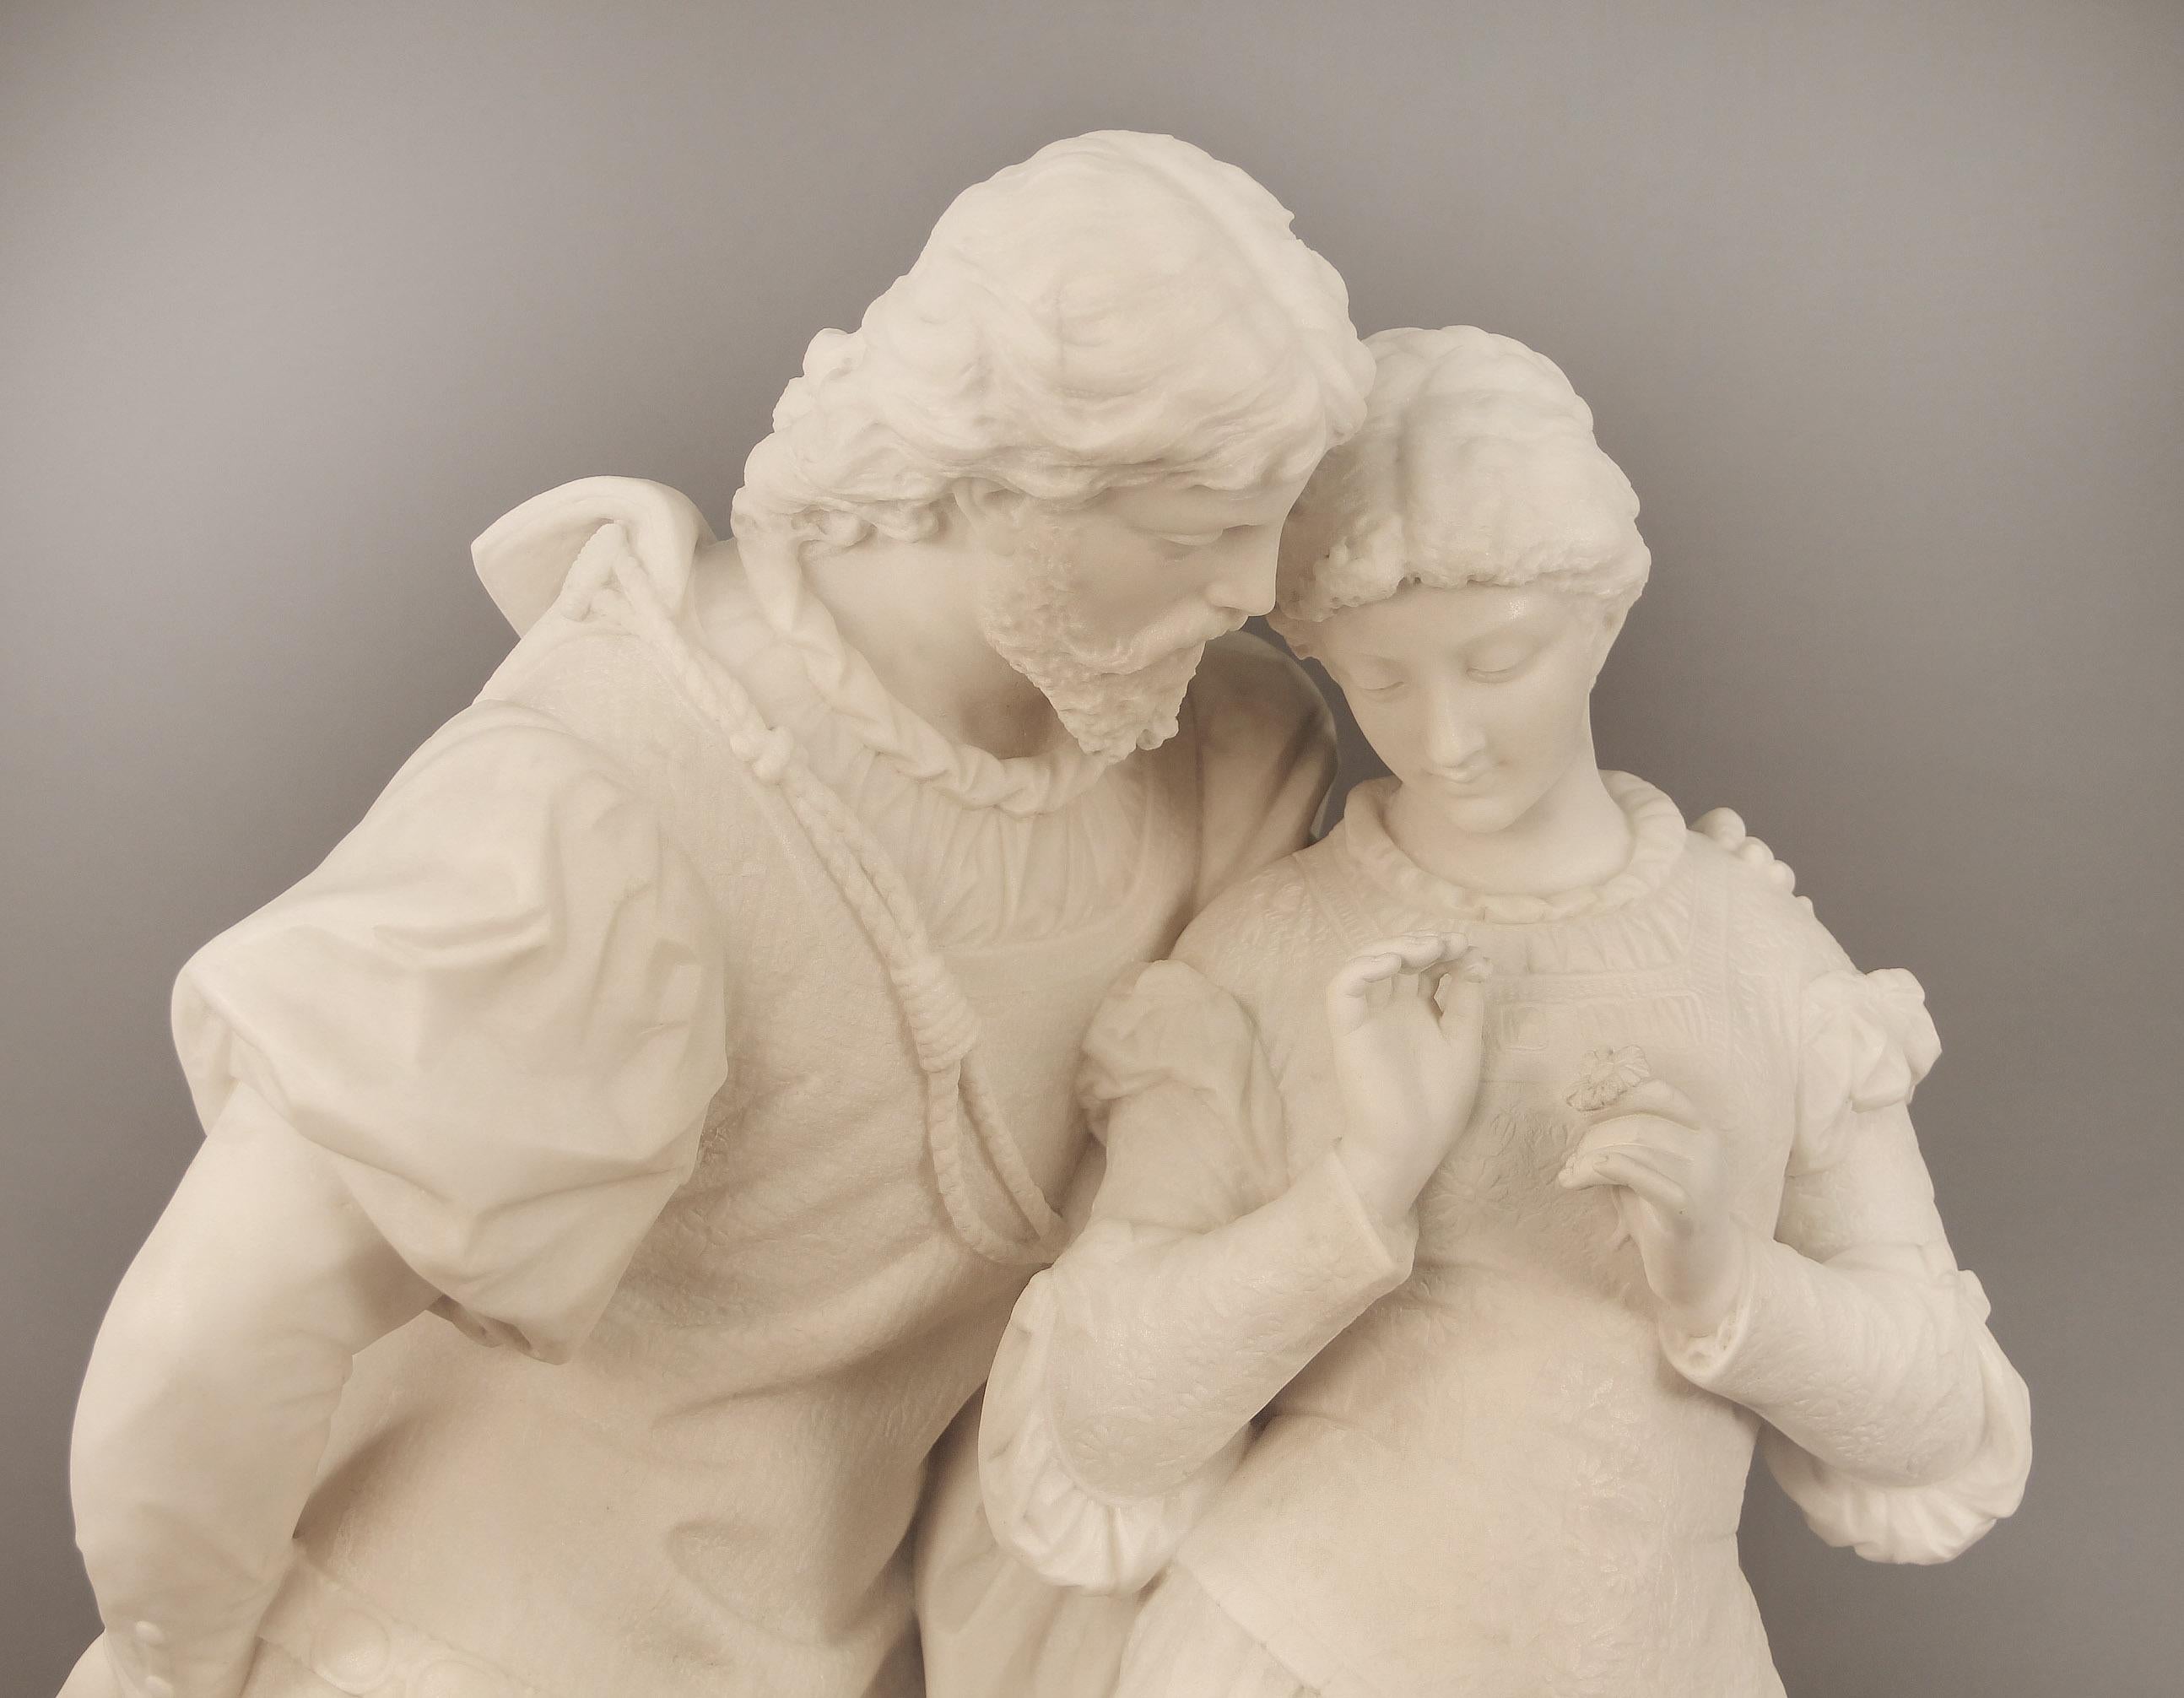 Belle Époque 19th Century Italian White Carrara Marble, “Paolo and Francesca” by Romanelli For Sale